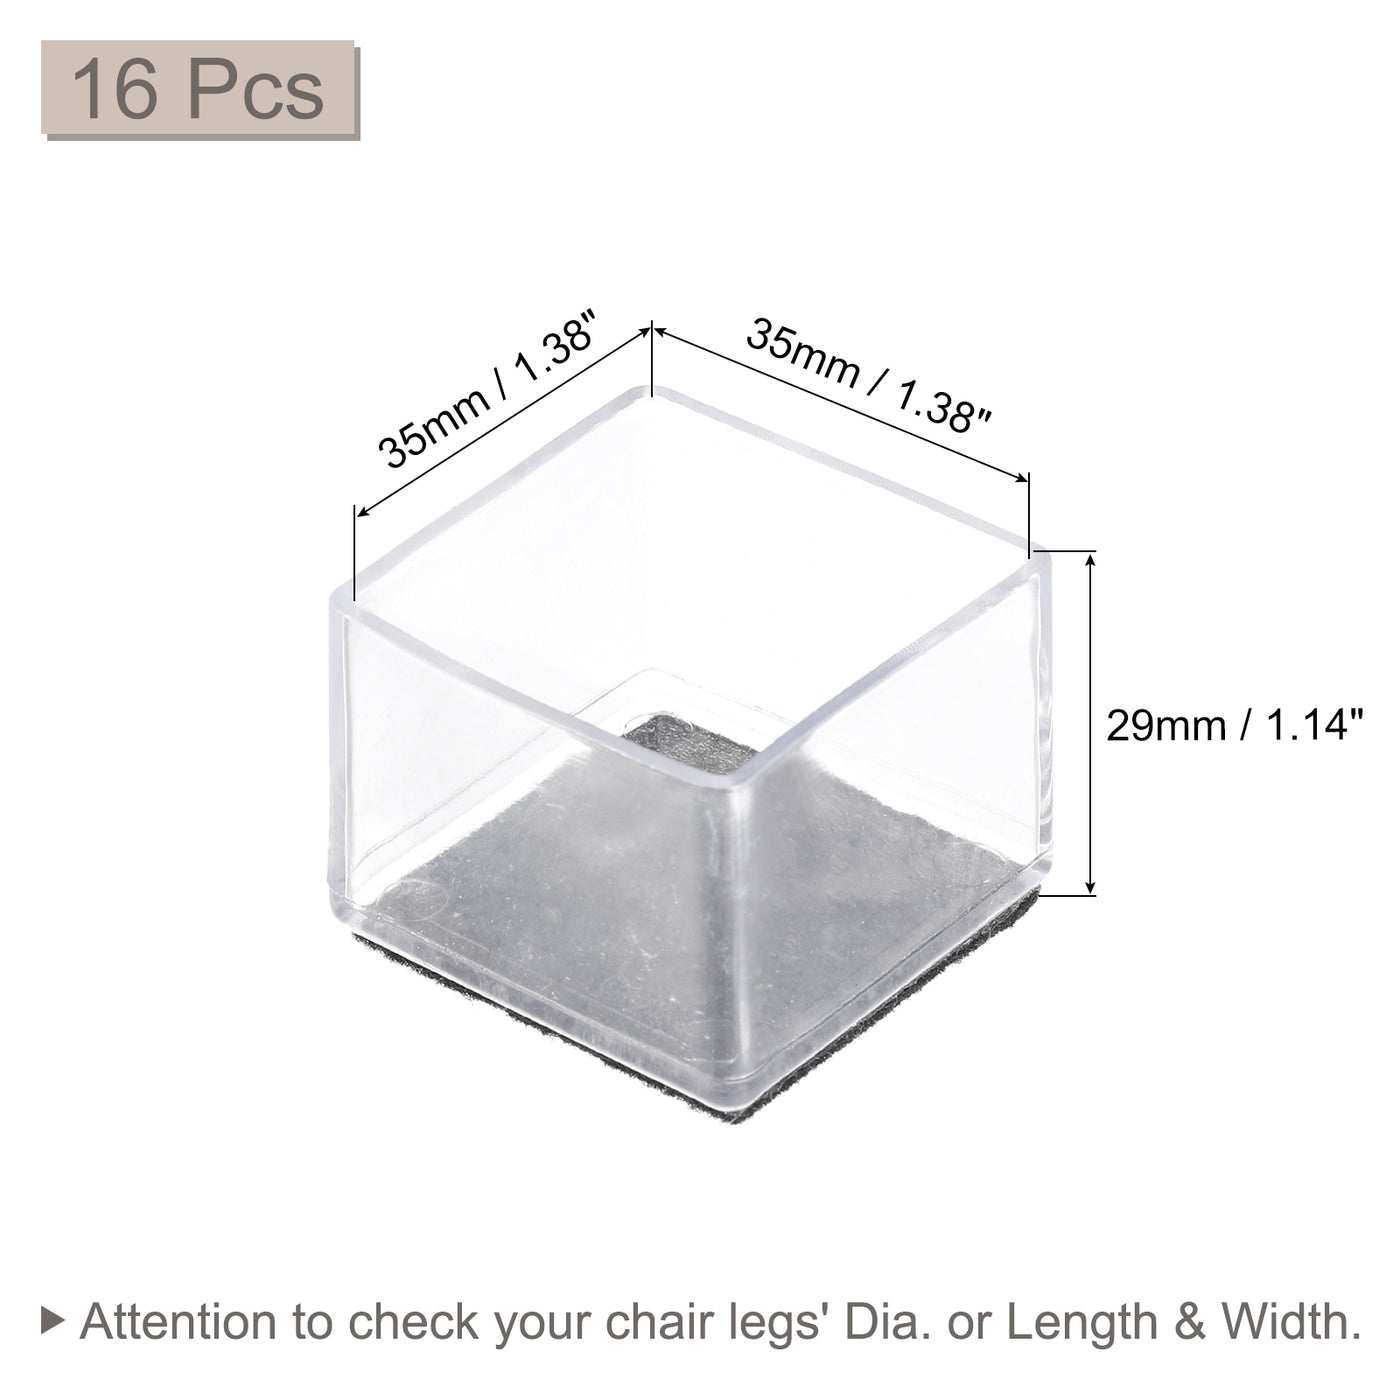 uxcell Uxcell Chair Leg Floor Protectors, 16Pcs 35mm(1.38") Square PVC & Felt Chair Leg Cover Caps for Hardwood Floors (Clear White)